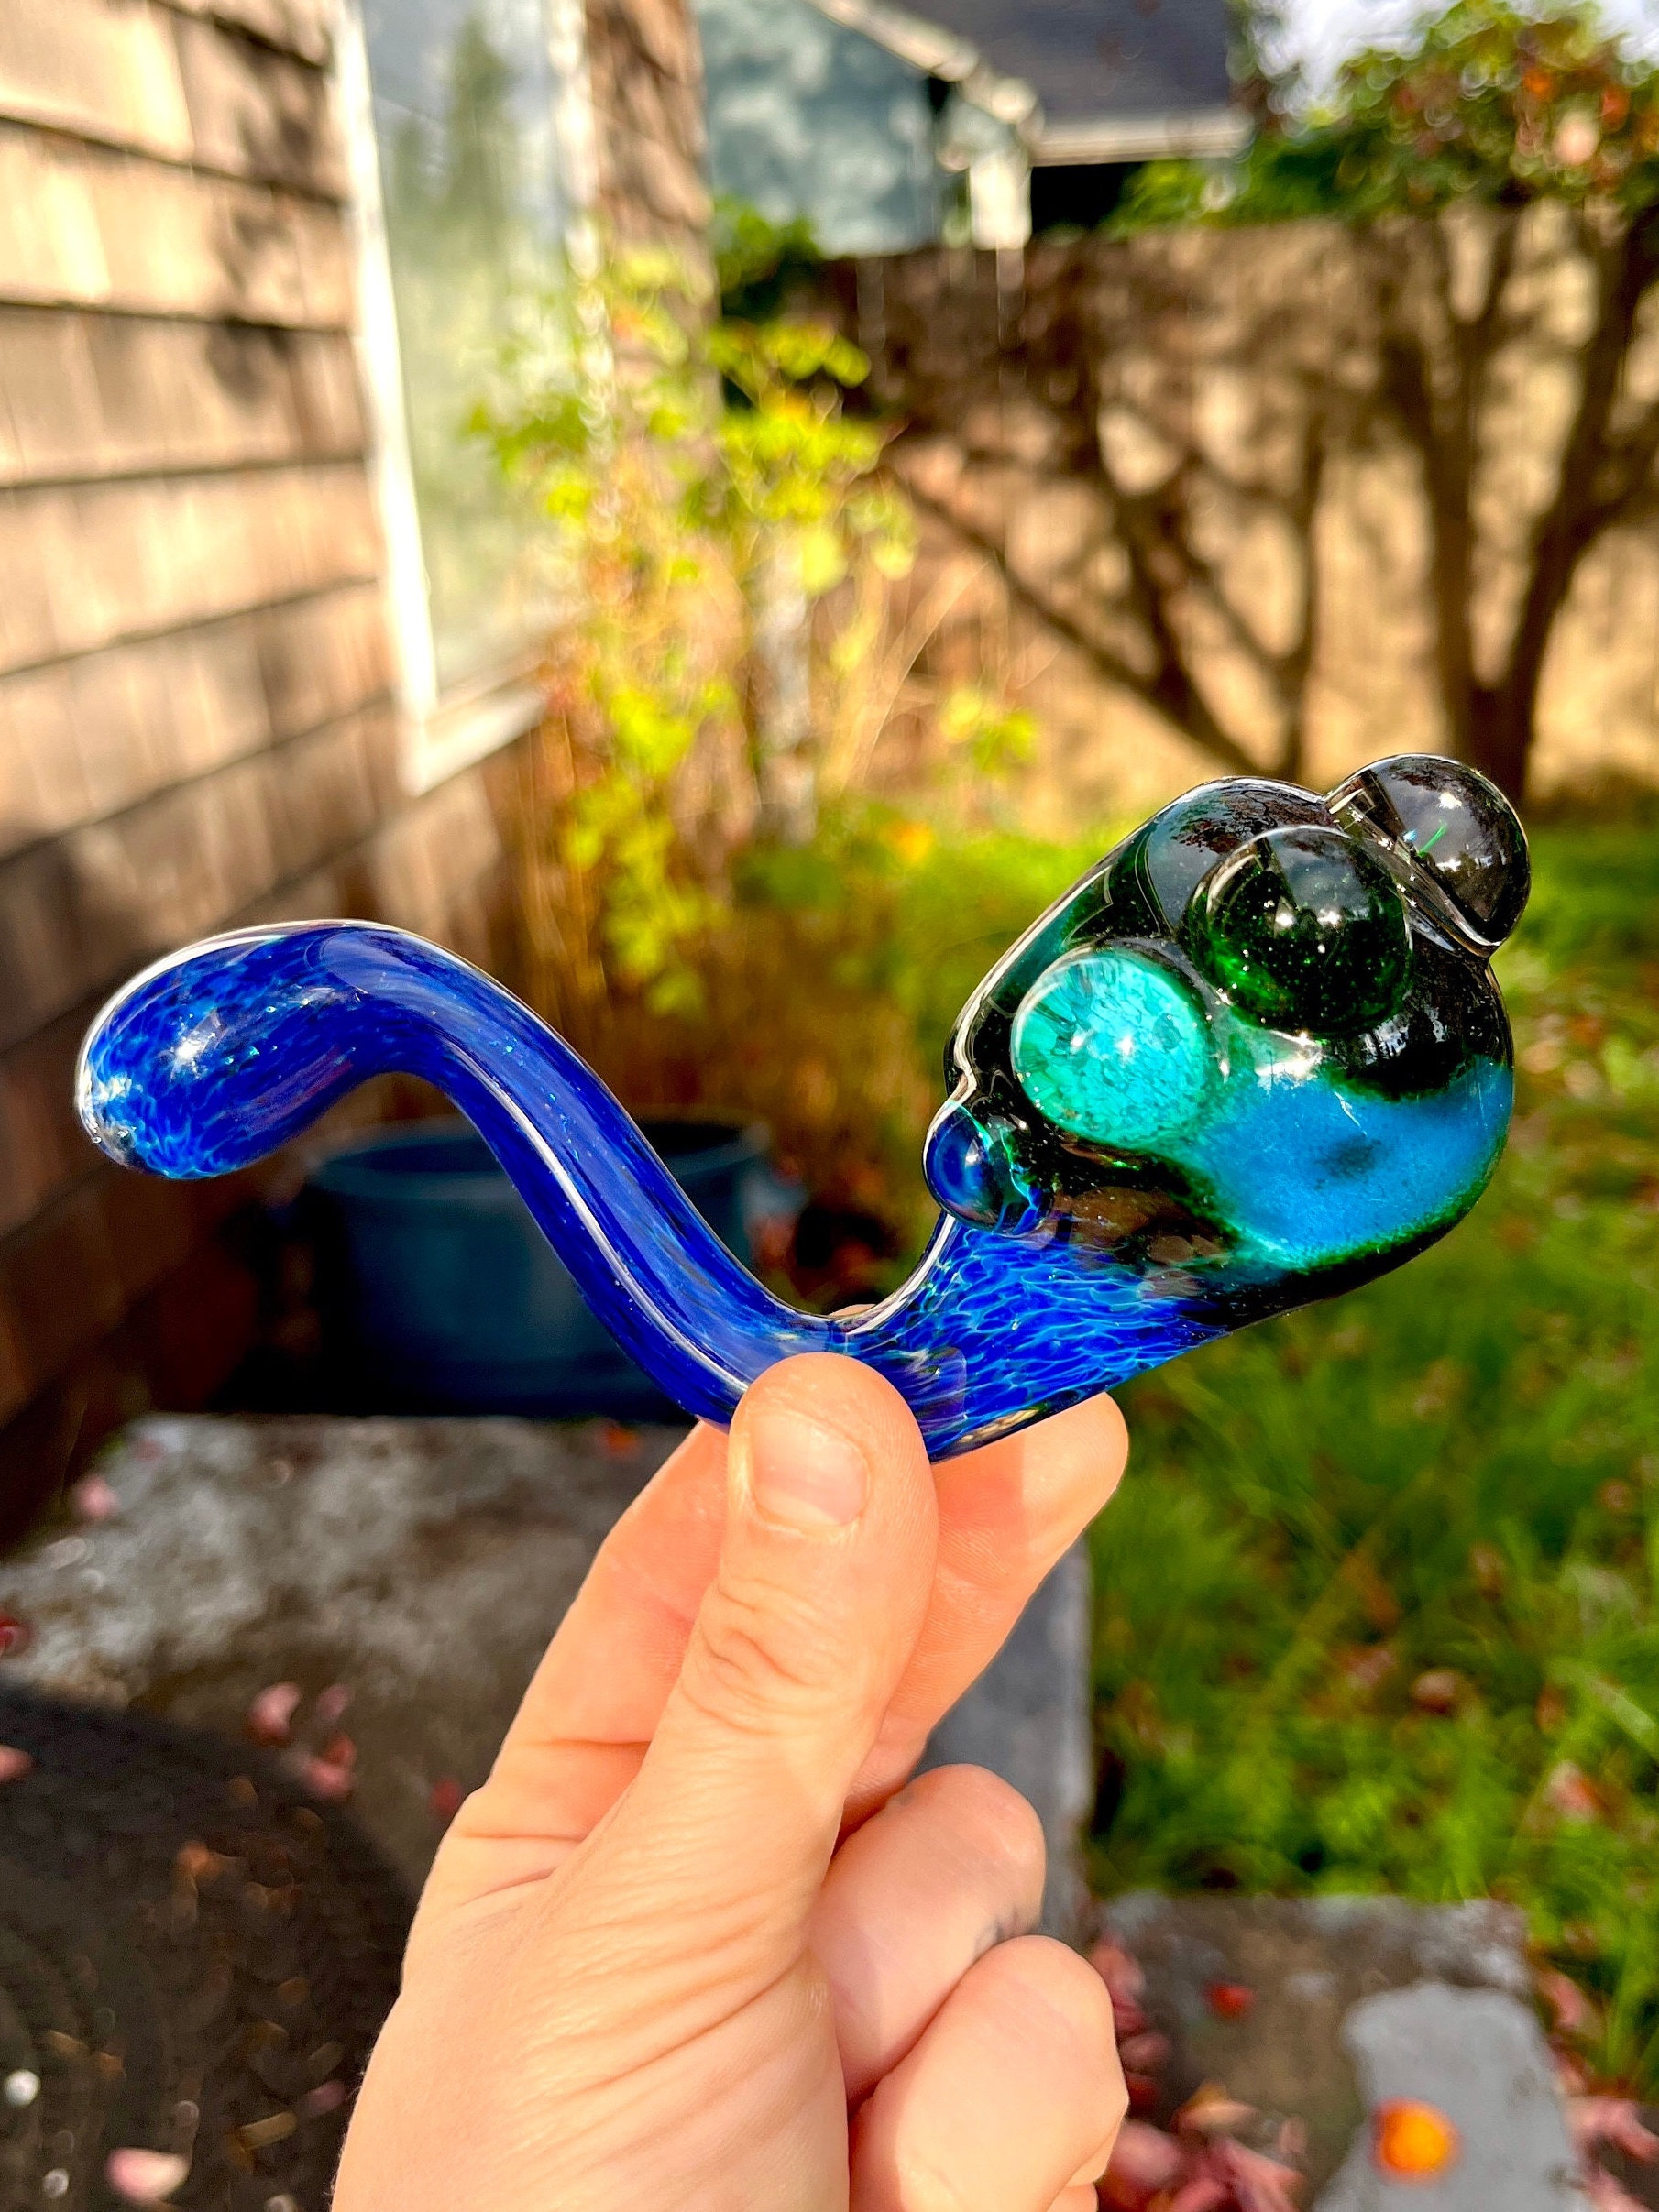 Custom Toothless Dragon Glass Smoking Pipe, Girly Pipes, Unique, Glass  Smoking Bowls, Spoon Pipe, Glow in the Dark Pipe, Glass Art Pipes 